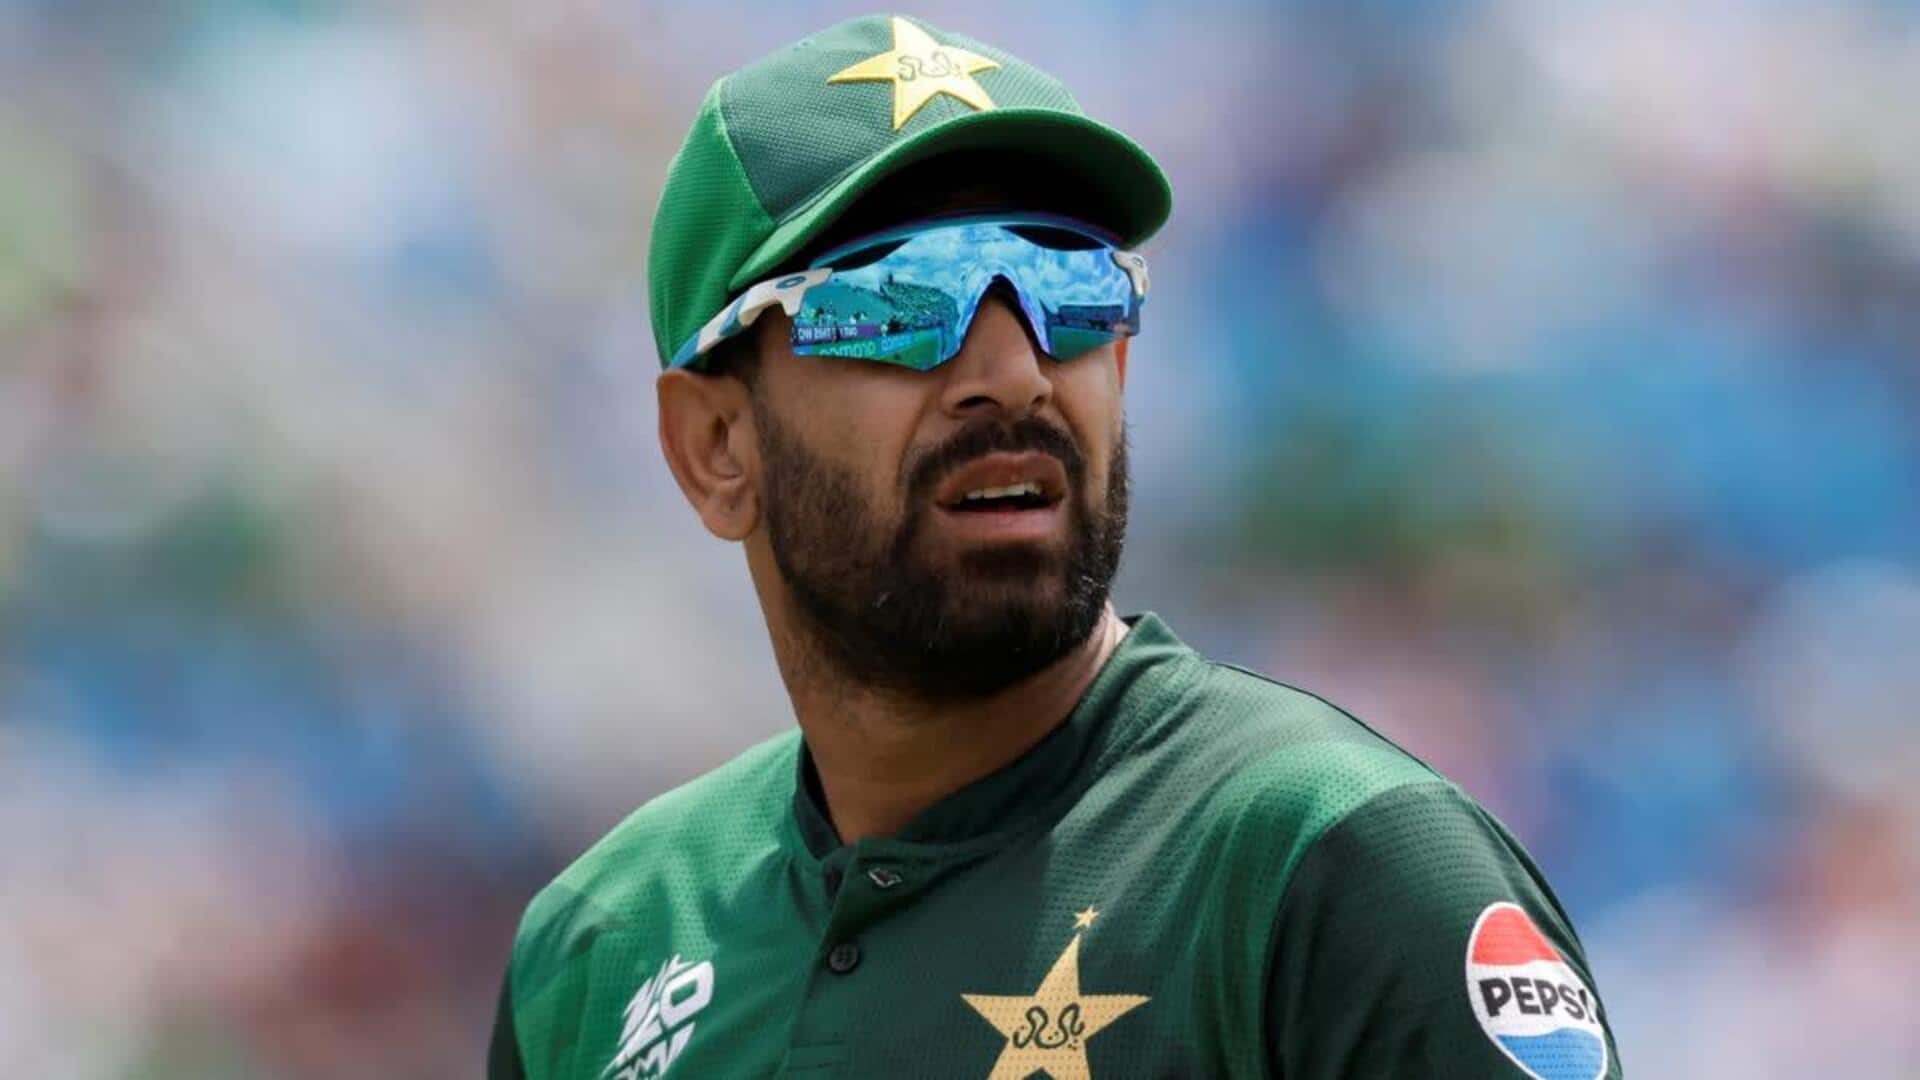 Pakistan cricketer Haris Rauf clarifies after altercation with fan: Details